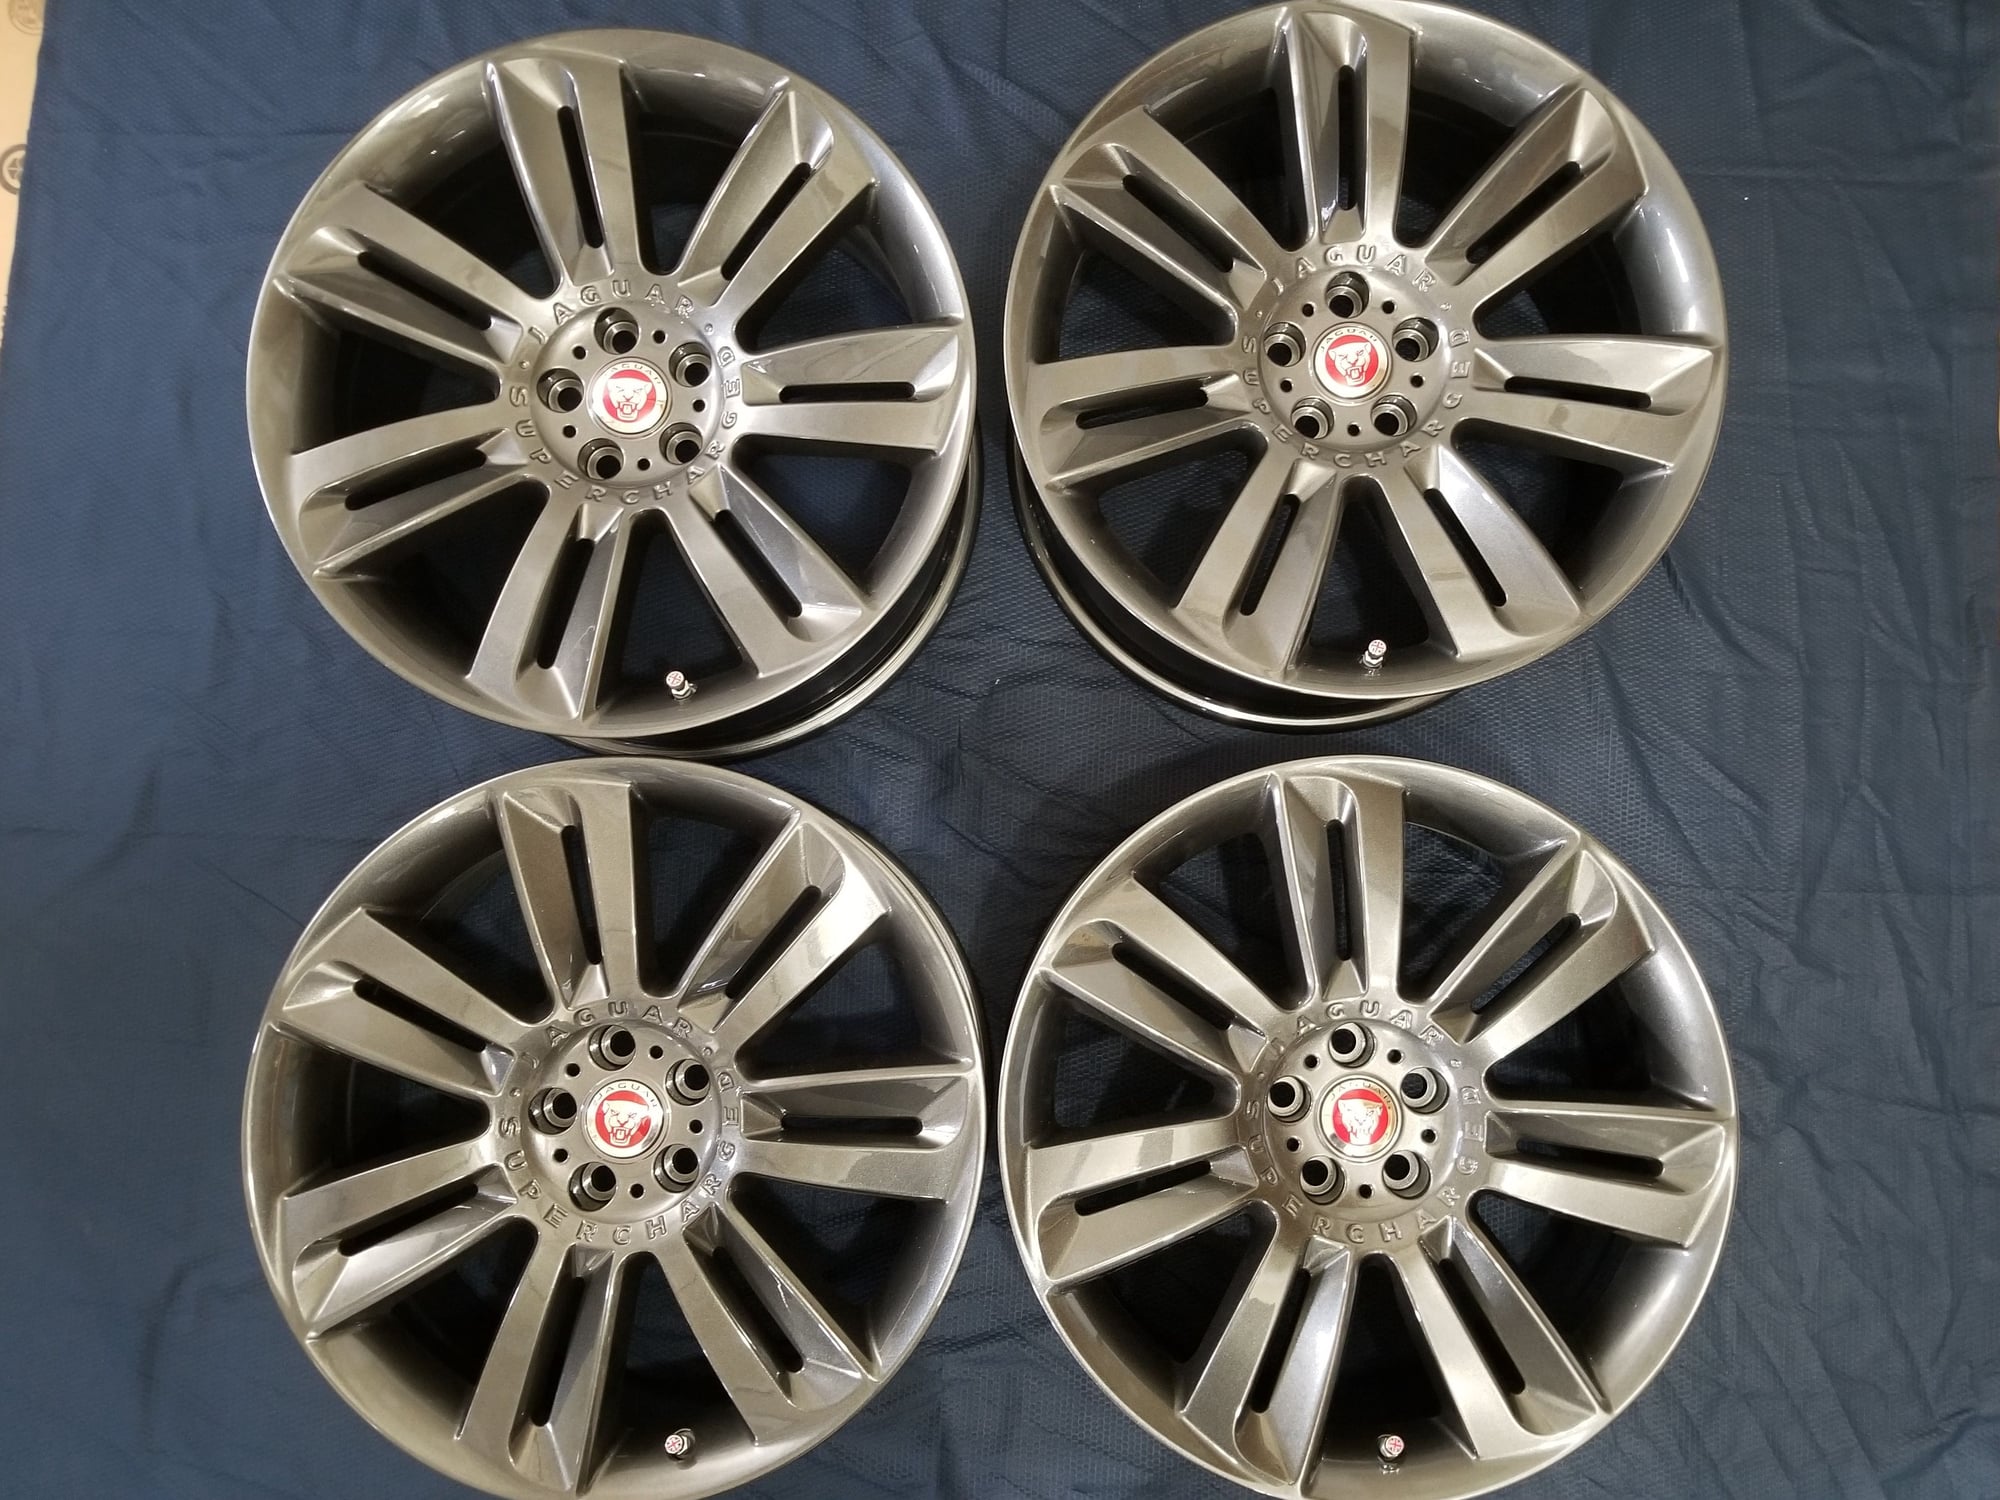 Wheels and Tires/Axles - Jaguar "Nevis" Wheels (TPMS) - Canada Listing - New - Toronto, ON M4Y1R5, Canada